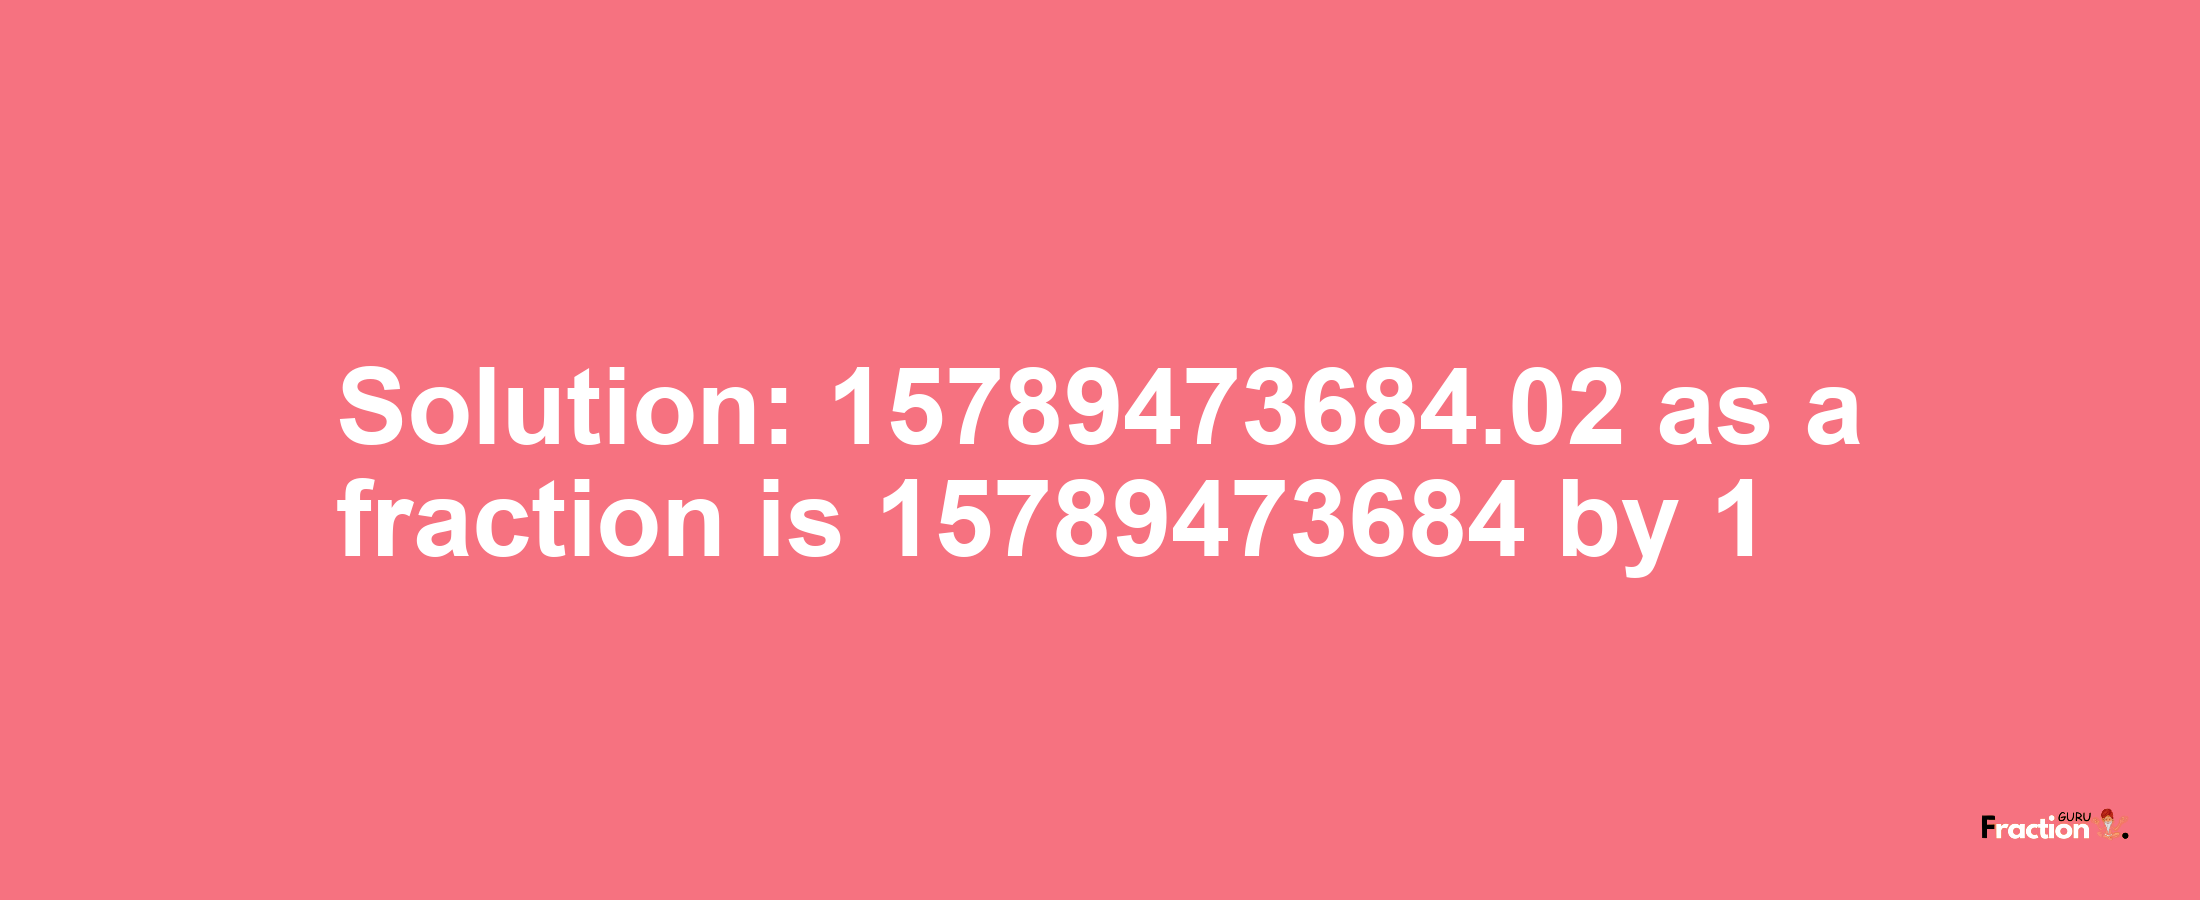 Solution:15789473684.02 as a fraction is 15789473684/1